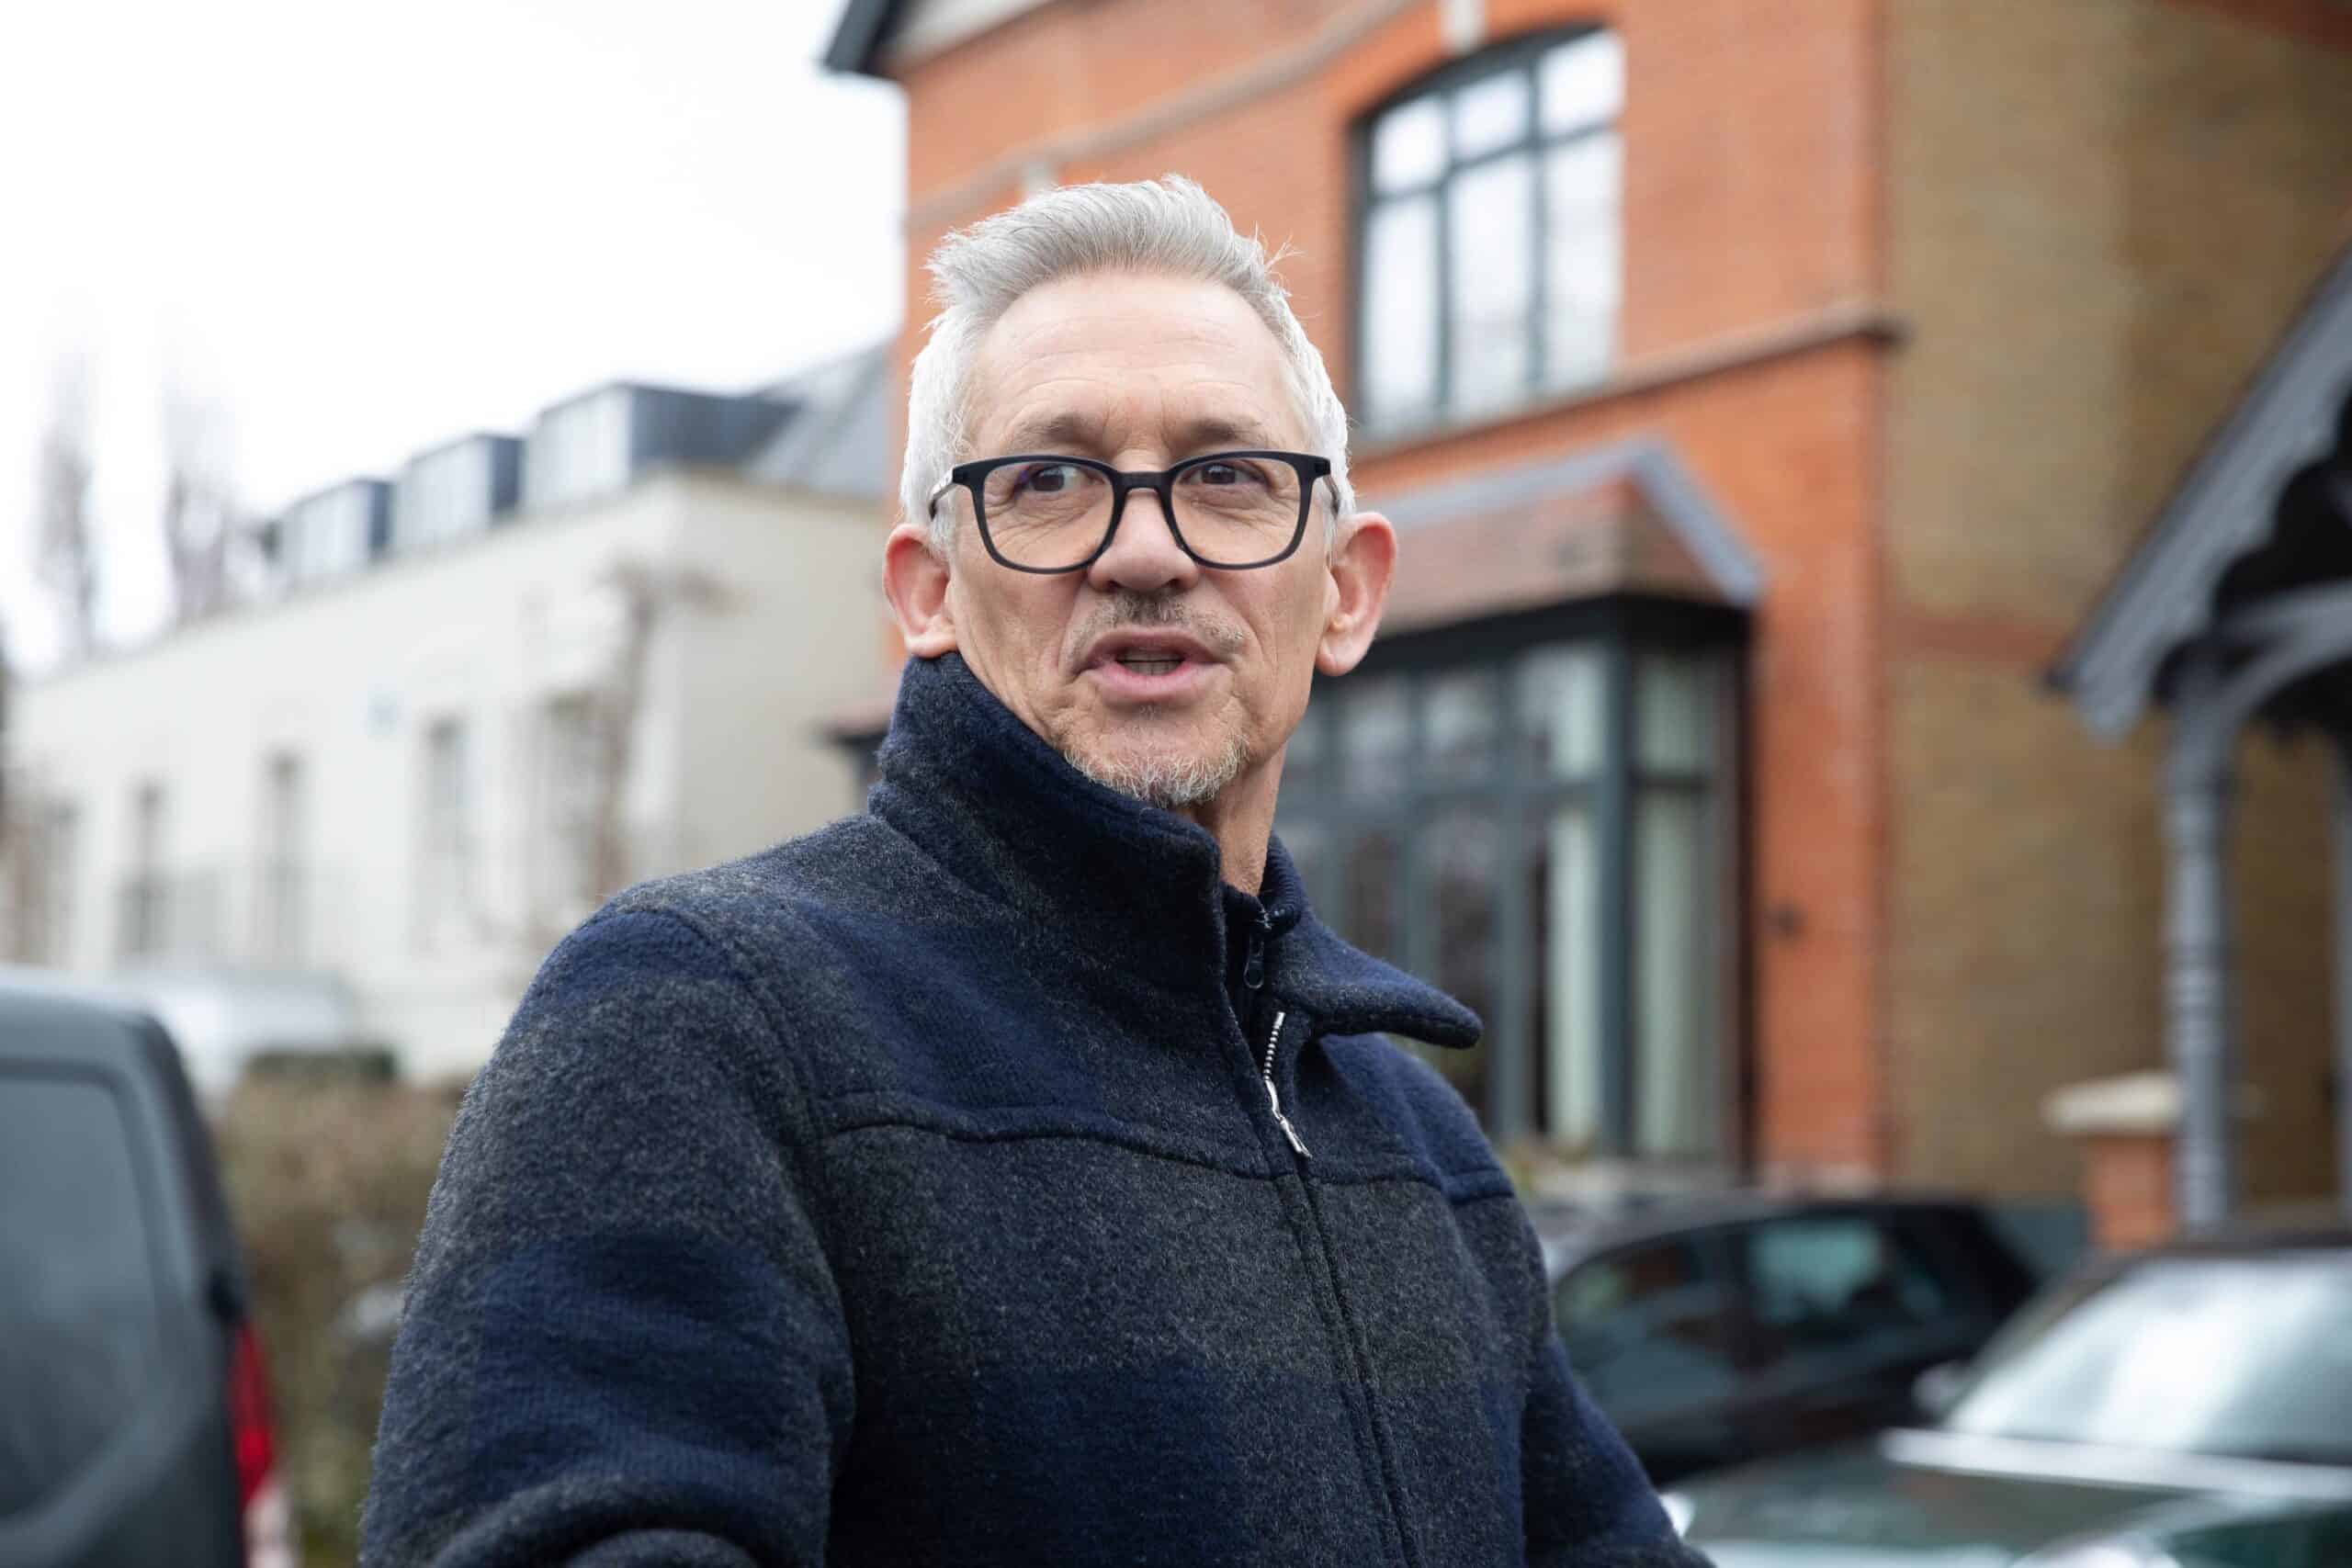 2 million viewers tune in to MOTD Live after Gary Lineker’s return